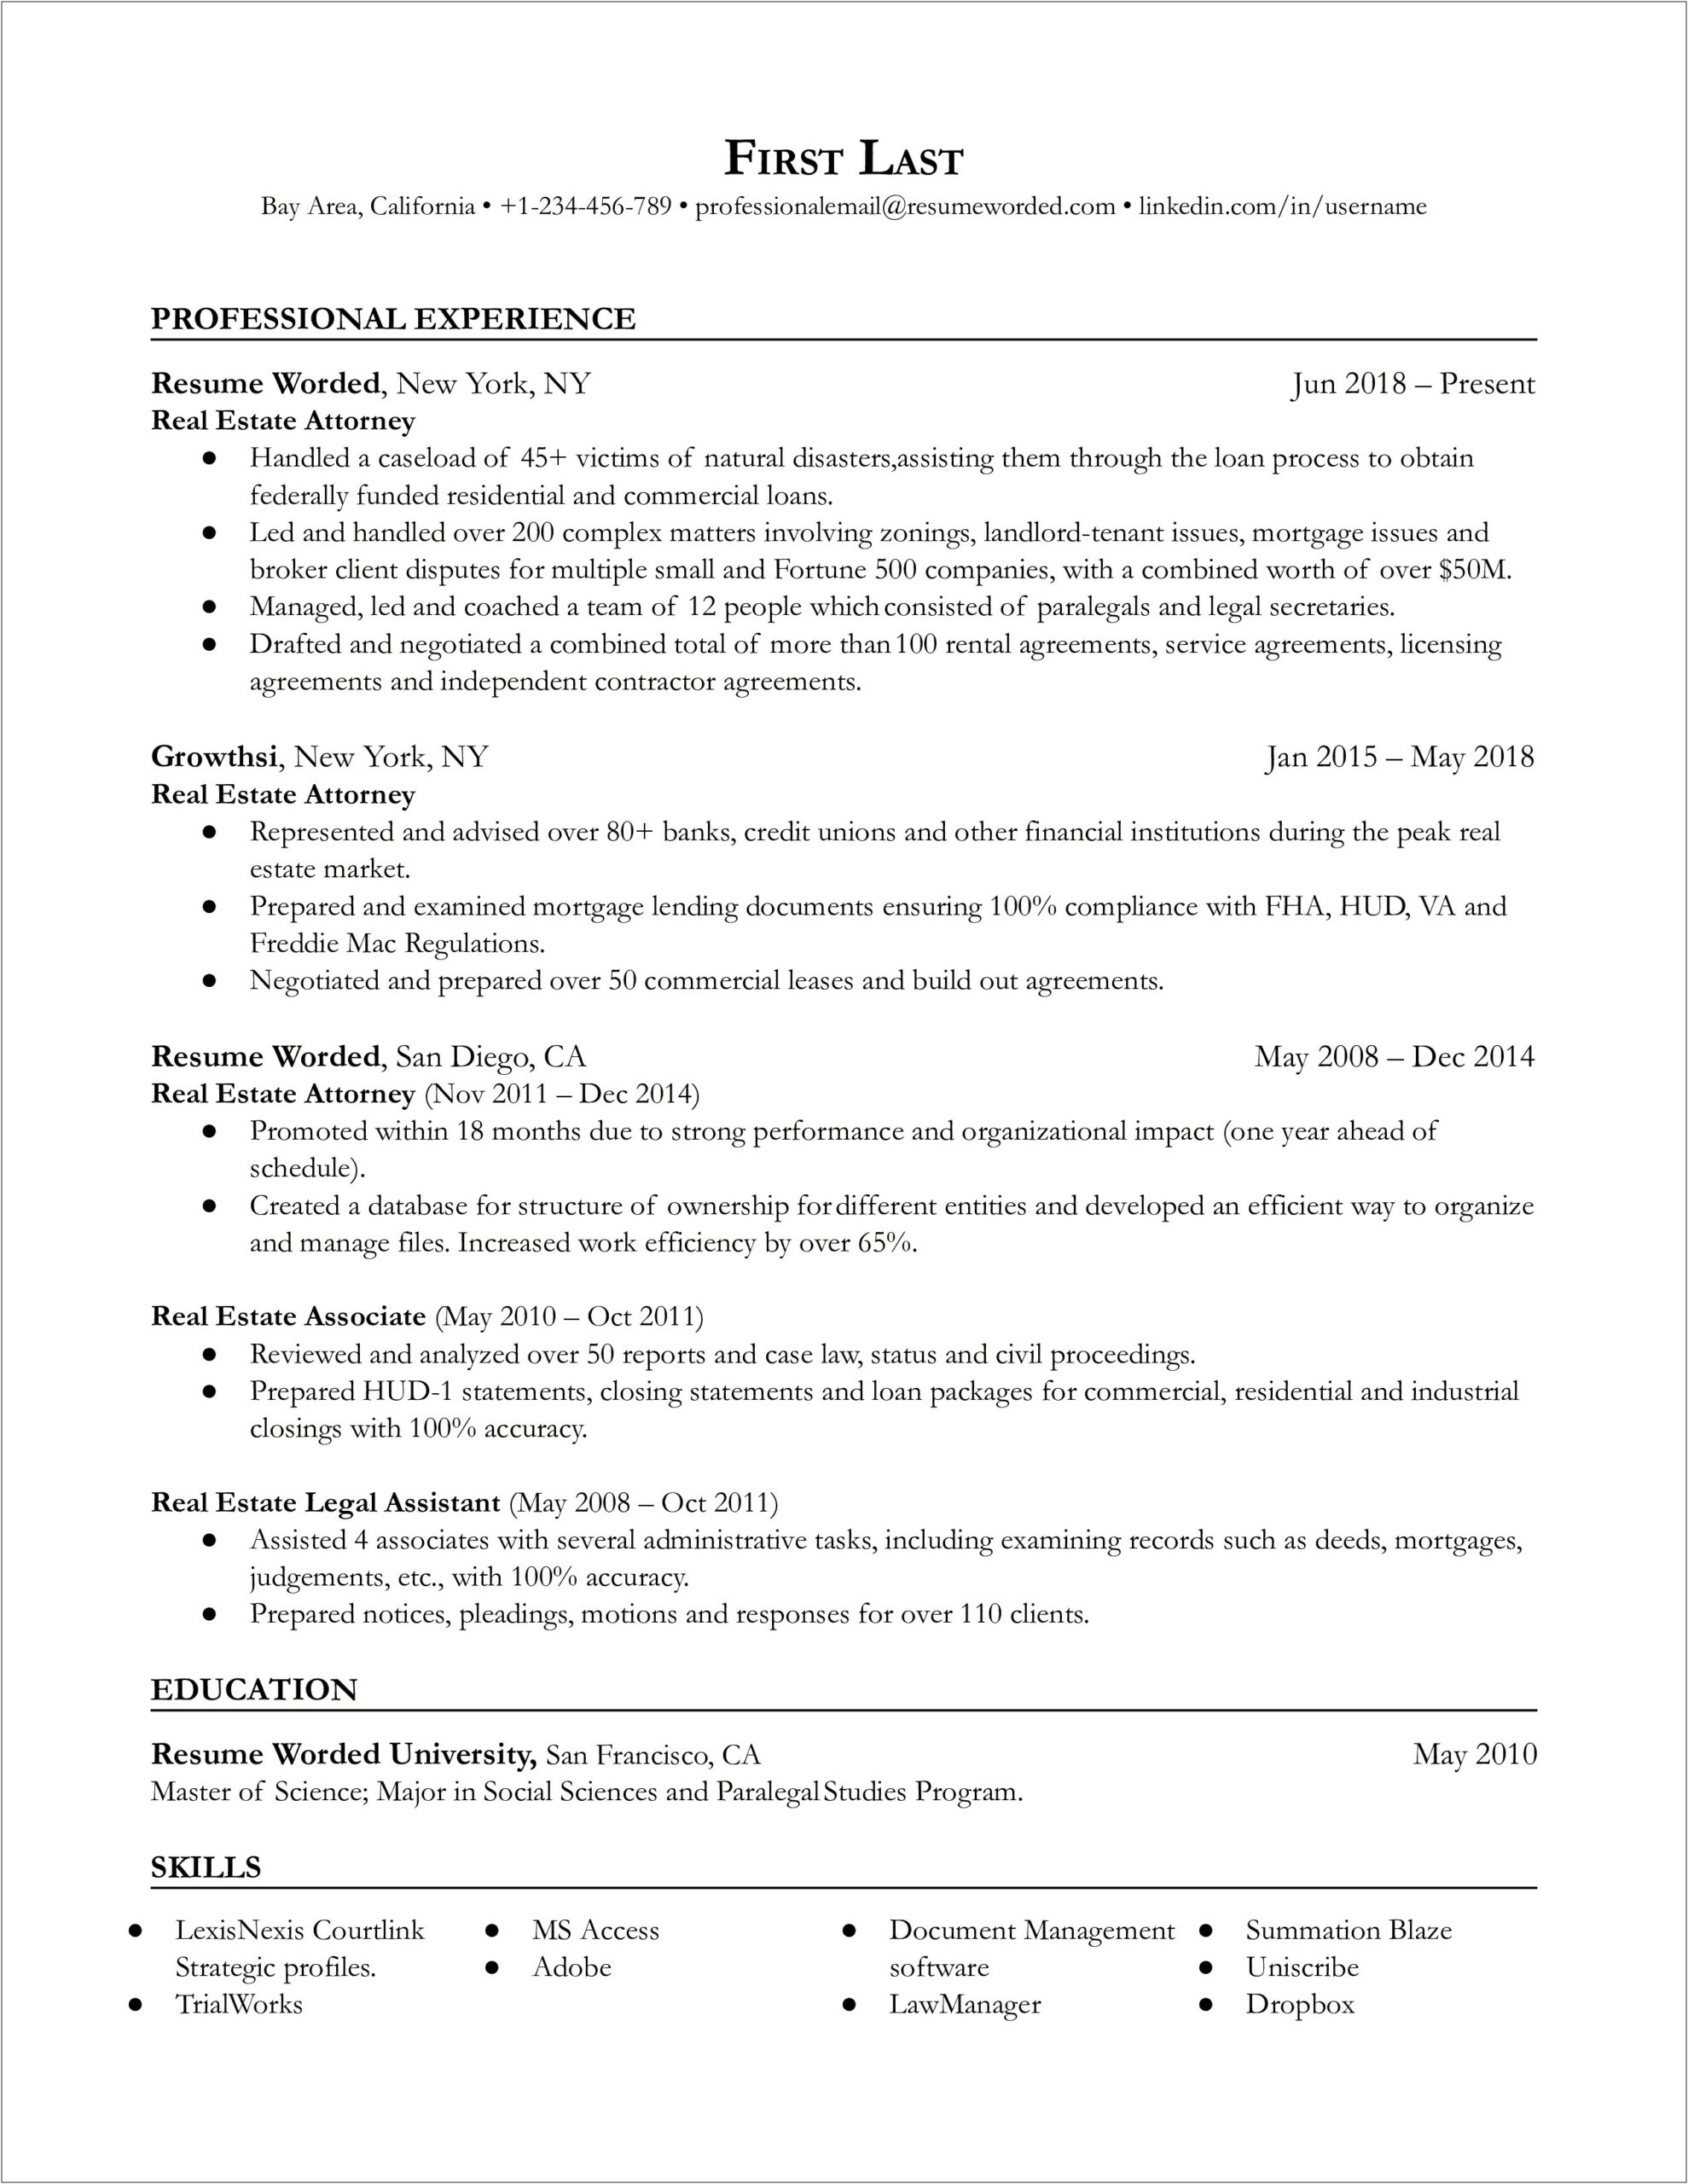 Sample Resume Commercial Real Estate Attorney